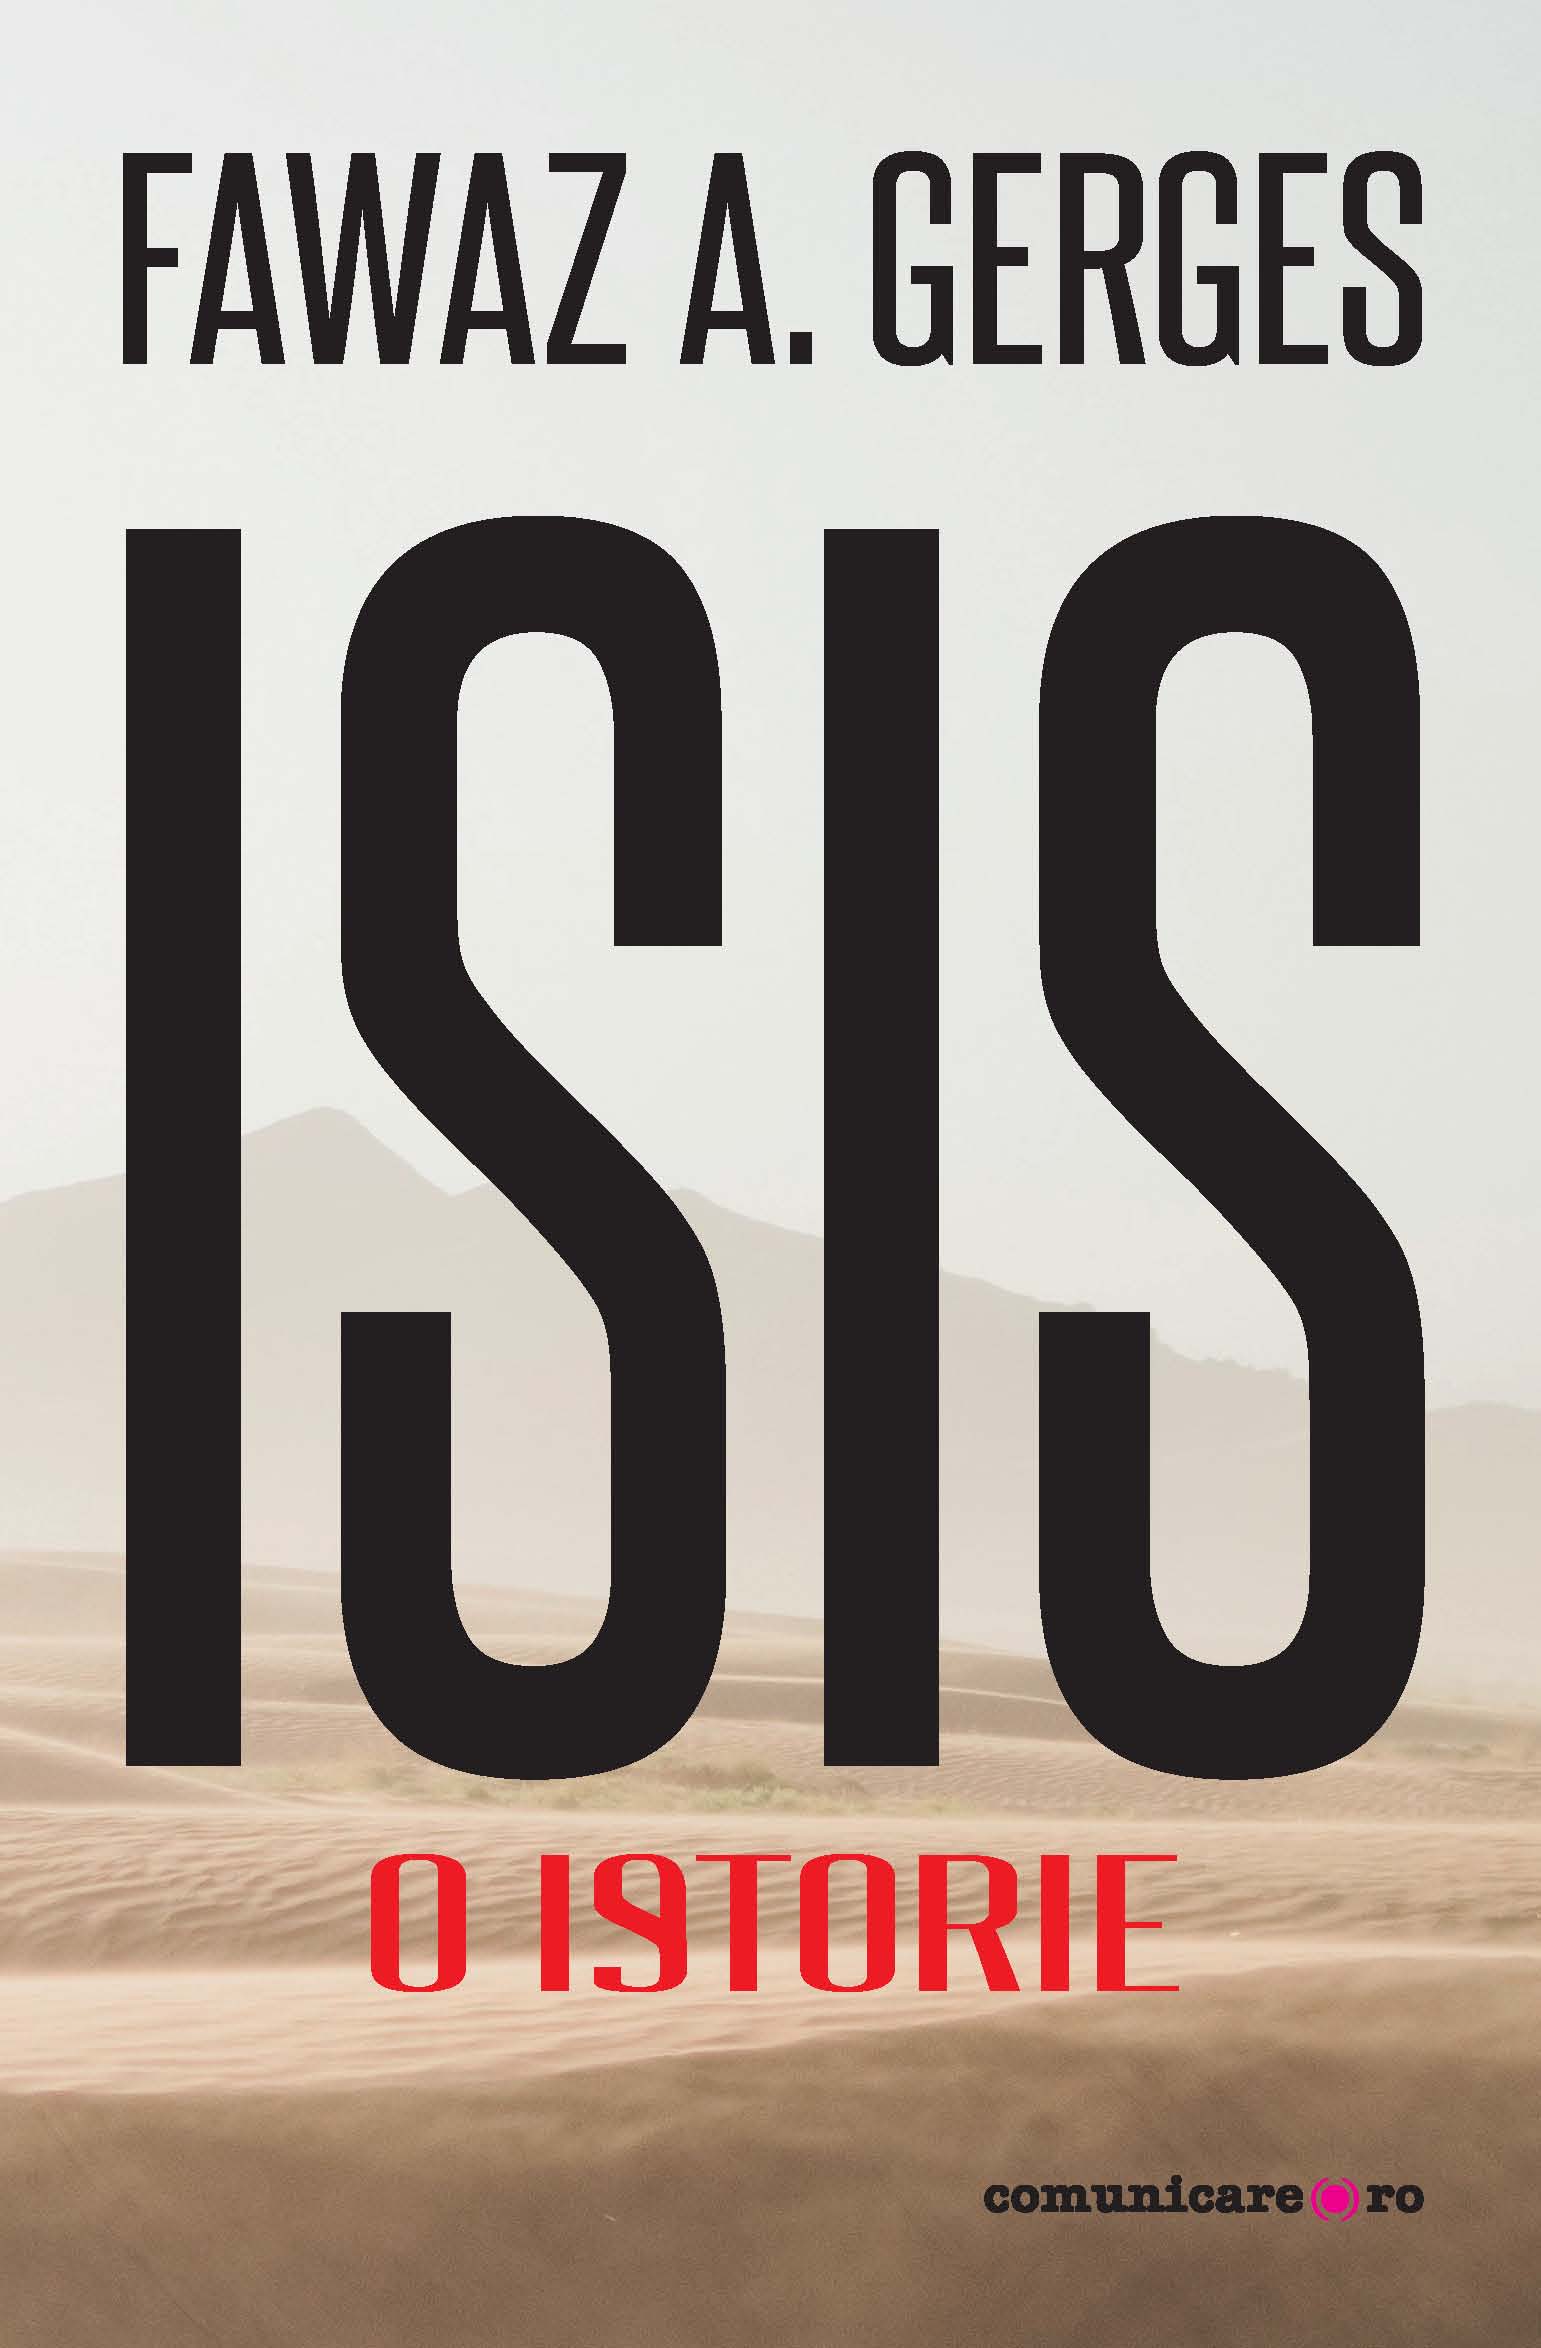 ISIS. O istorie | Fawaz A. Gerges carturesti.ro poza bestsellers.ro